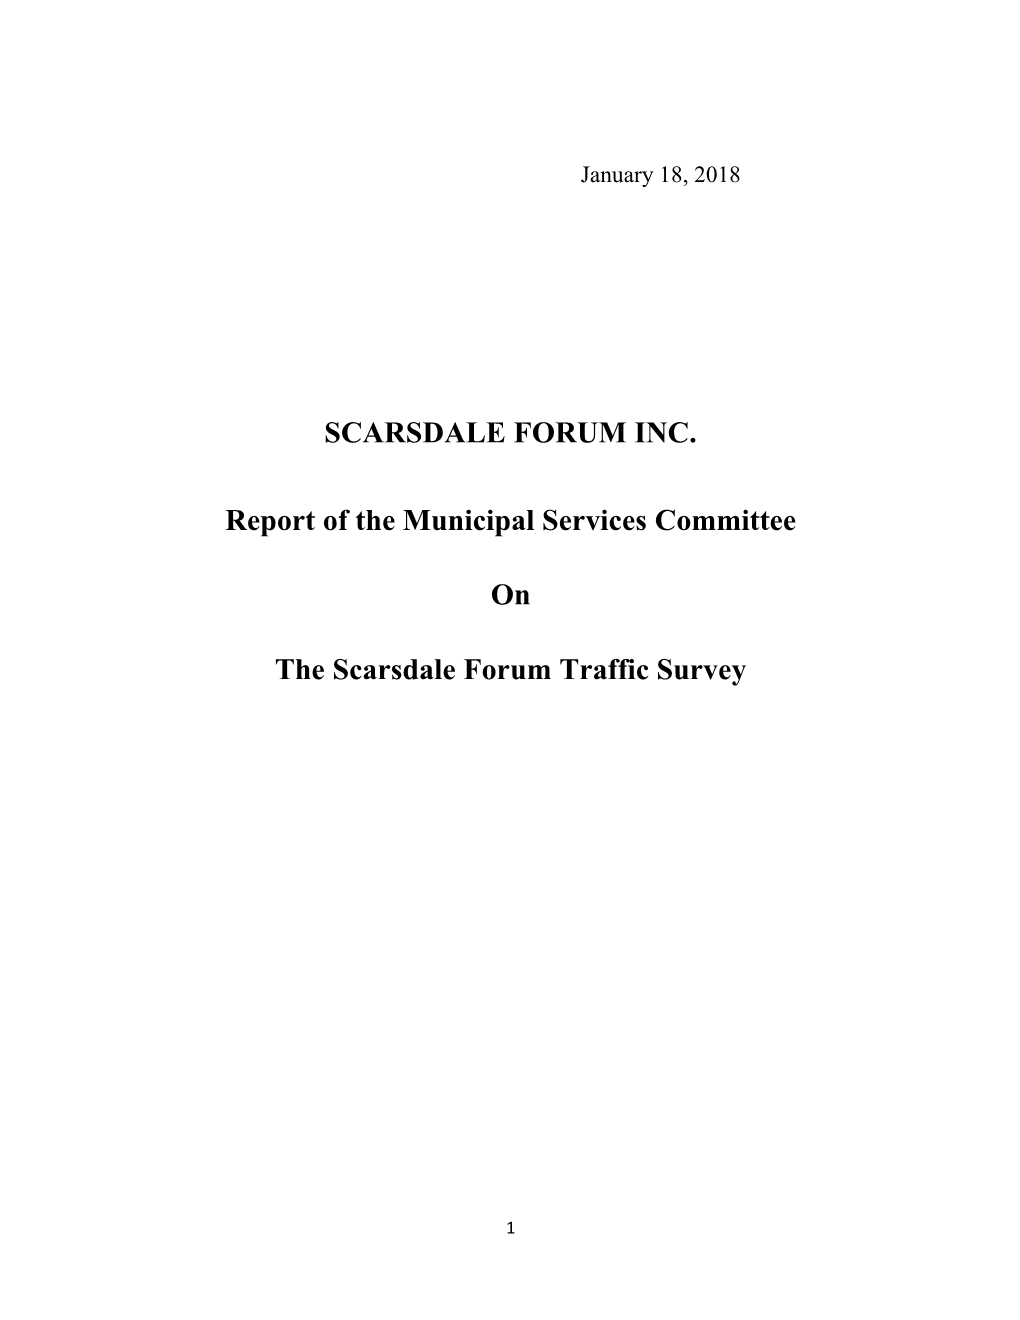 SCARSDALE FORUM INC. Report of the Municipal Services Committee on the Scarsdale Forum Traffic Survey